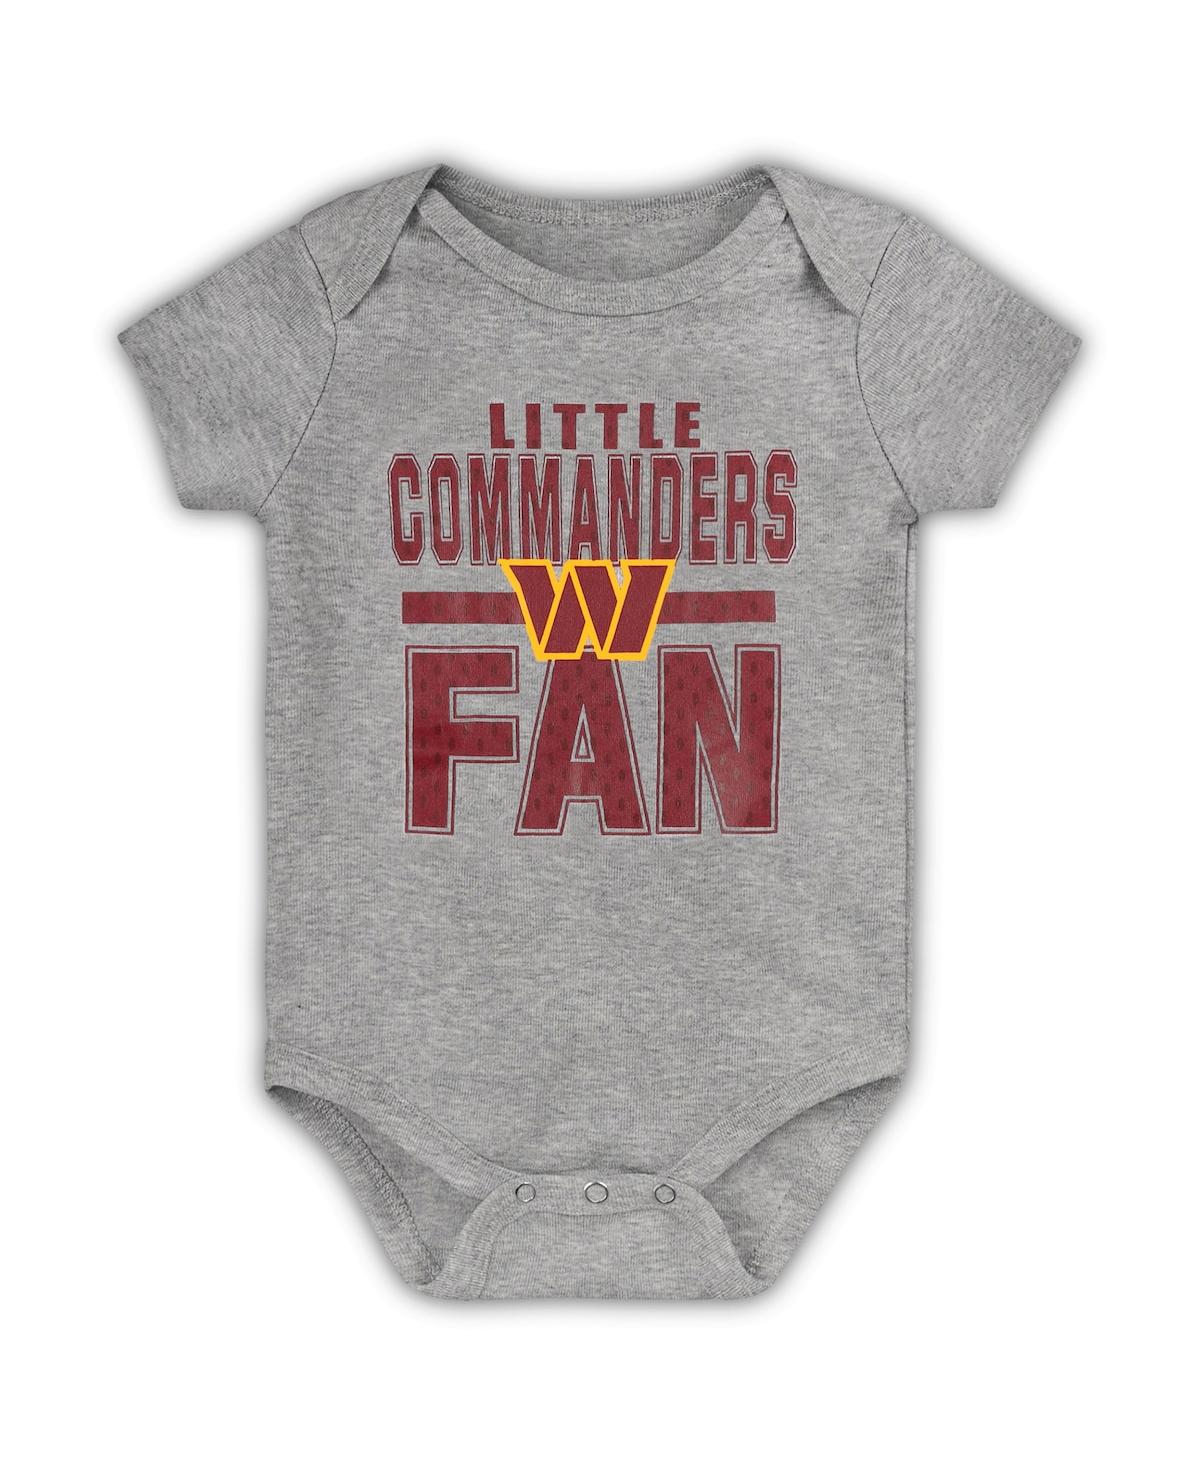 Outerstuff Babies' Newborn And Infant Boys And Girls Heathered Gray Washington Commanders Little Fan Bodysuit